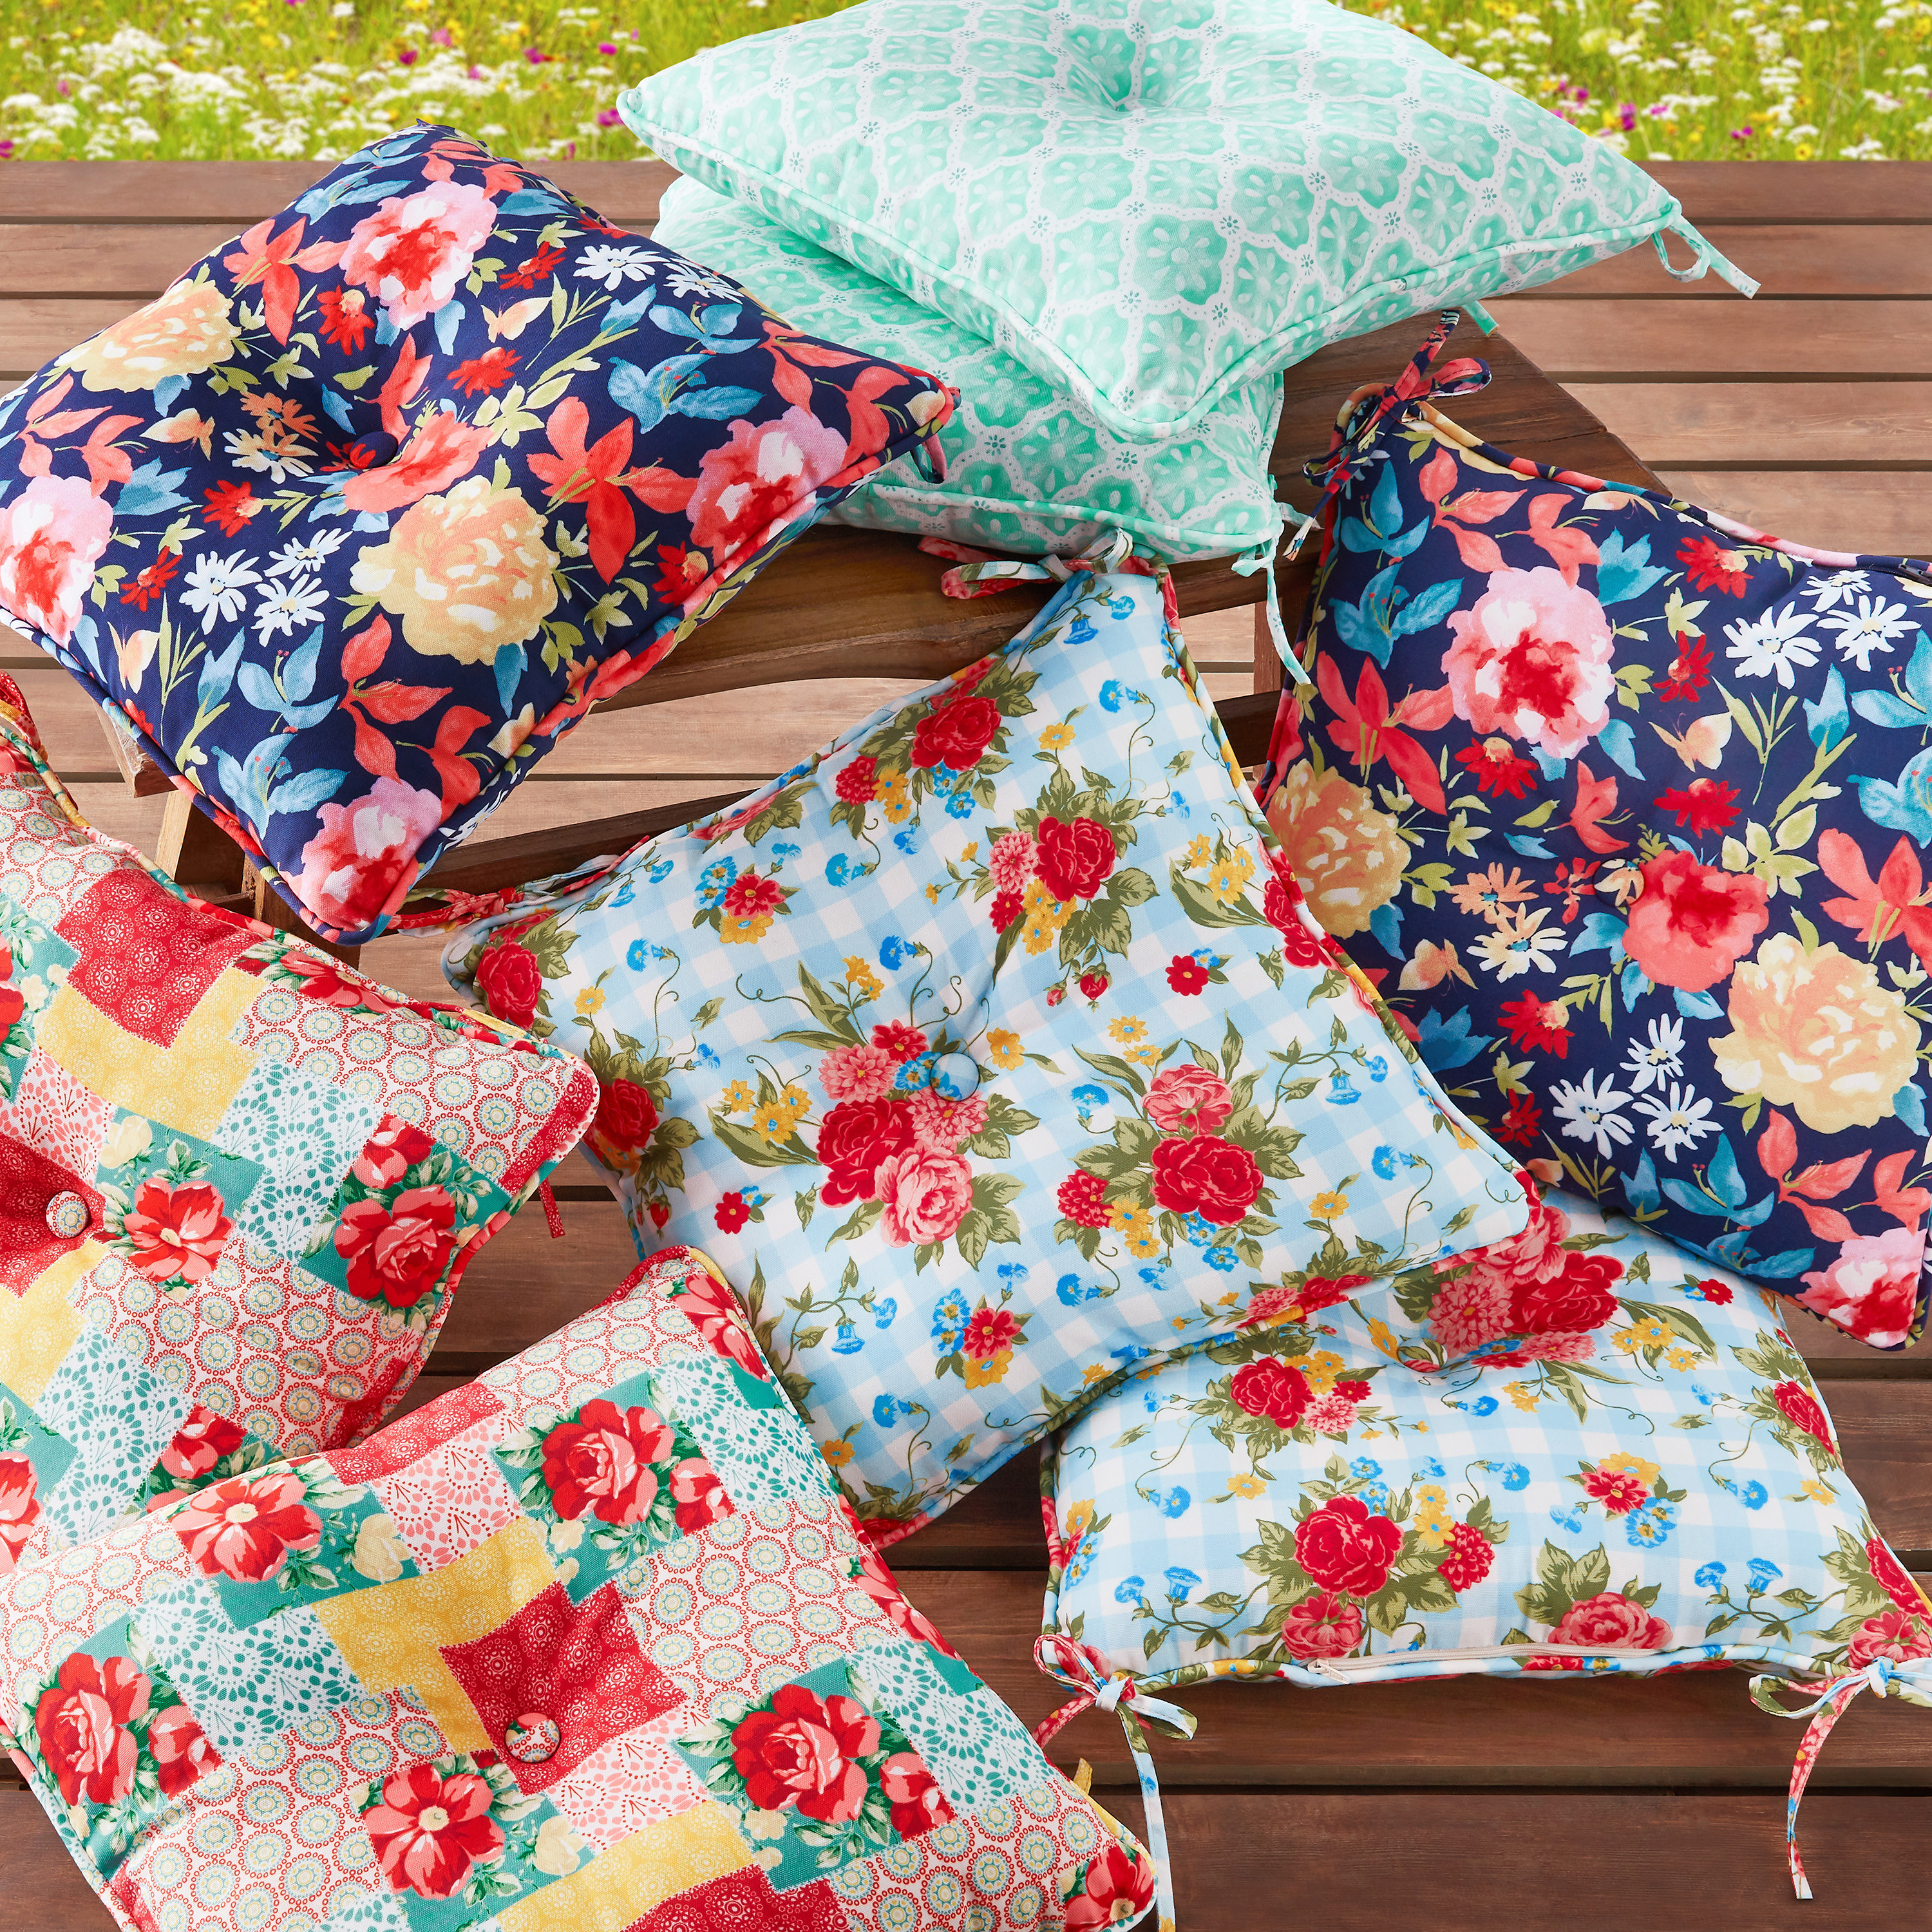 The Pioneer Woman 18" x 19" Multi-color Floral Patchwork Outdoor Seat Pad, 2 Pack - image 5 of 8